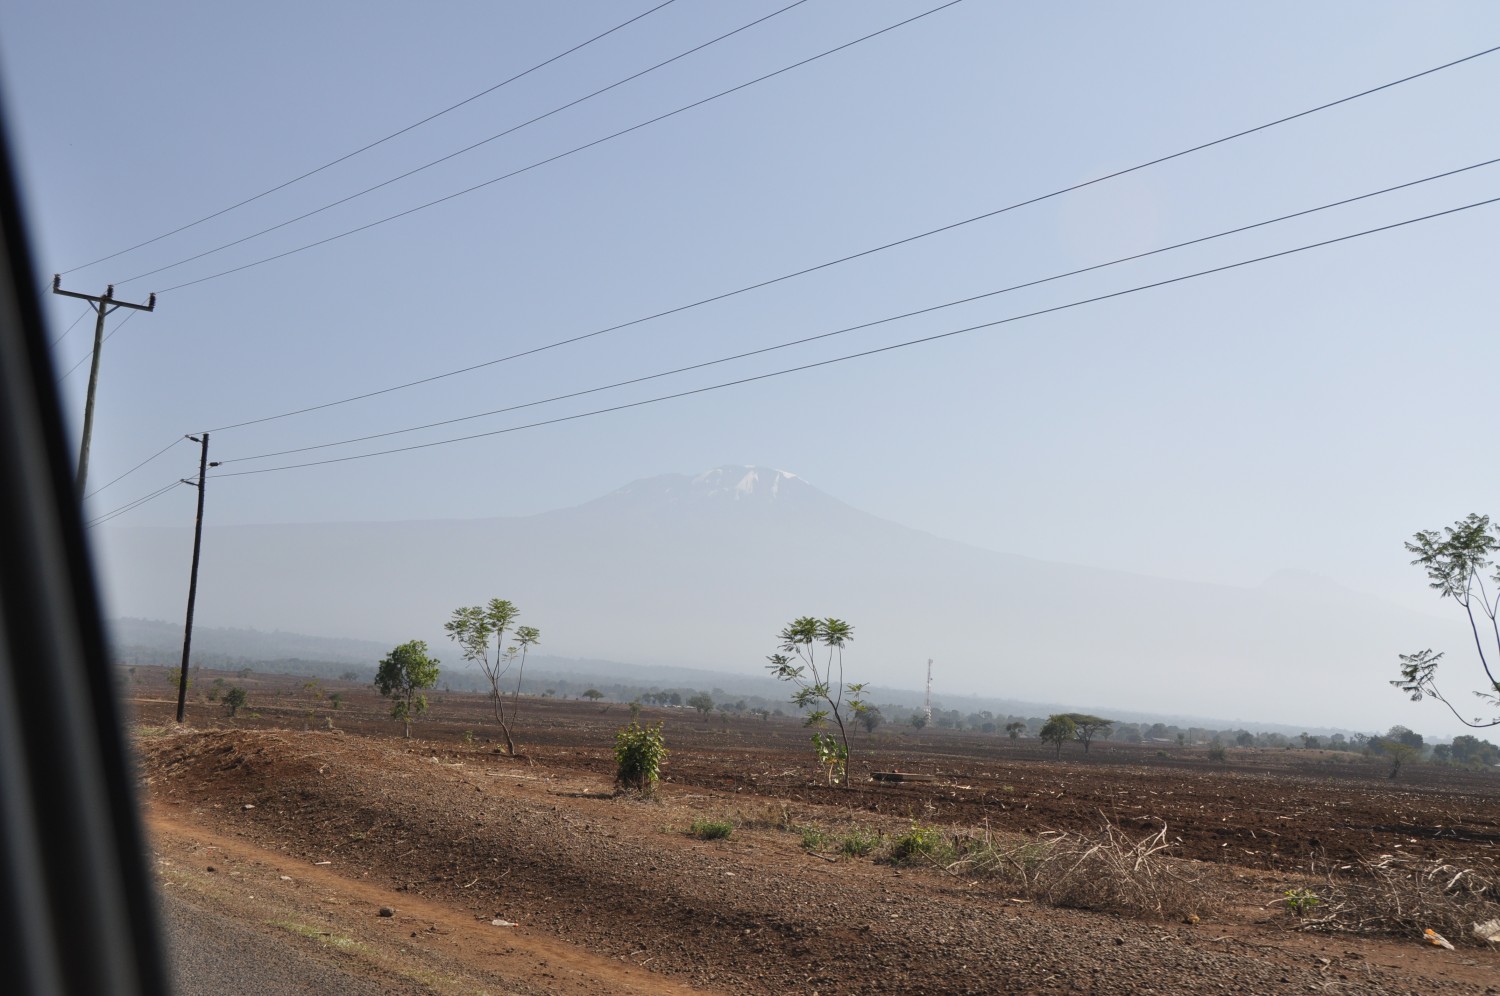 View of the Kilimanjaro from the car